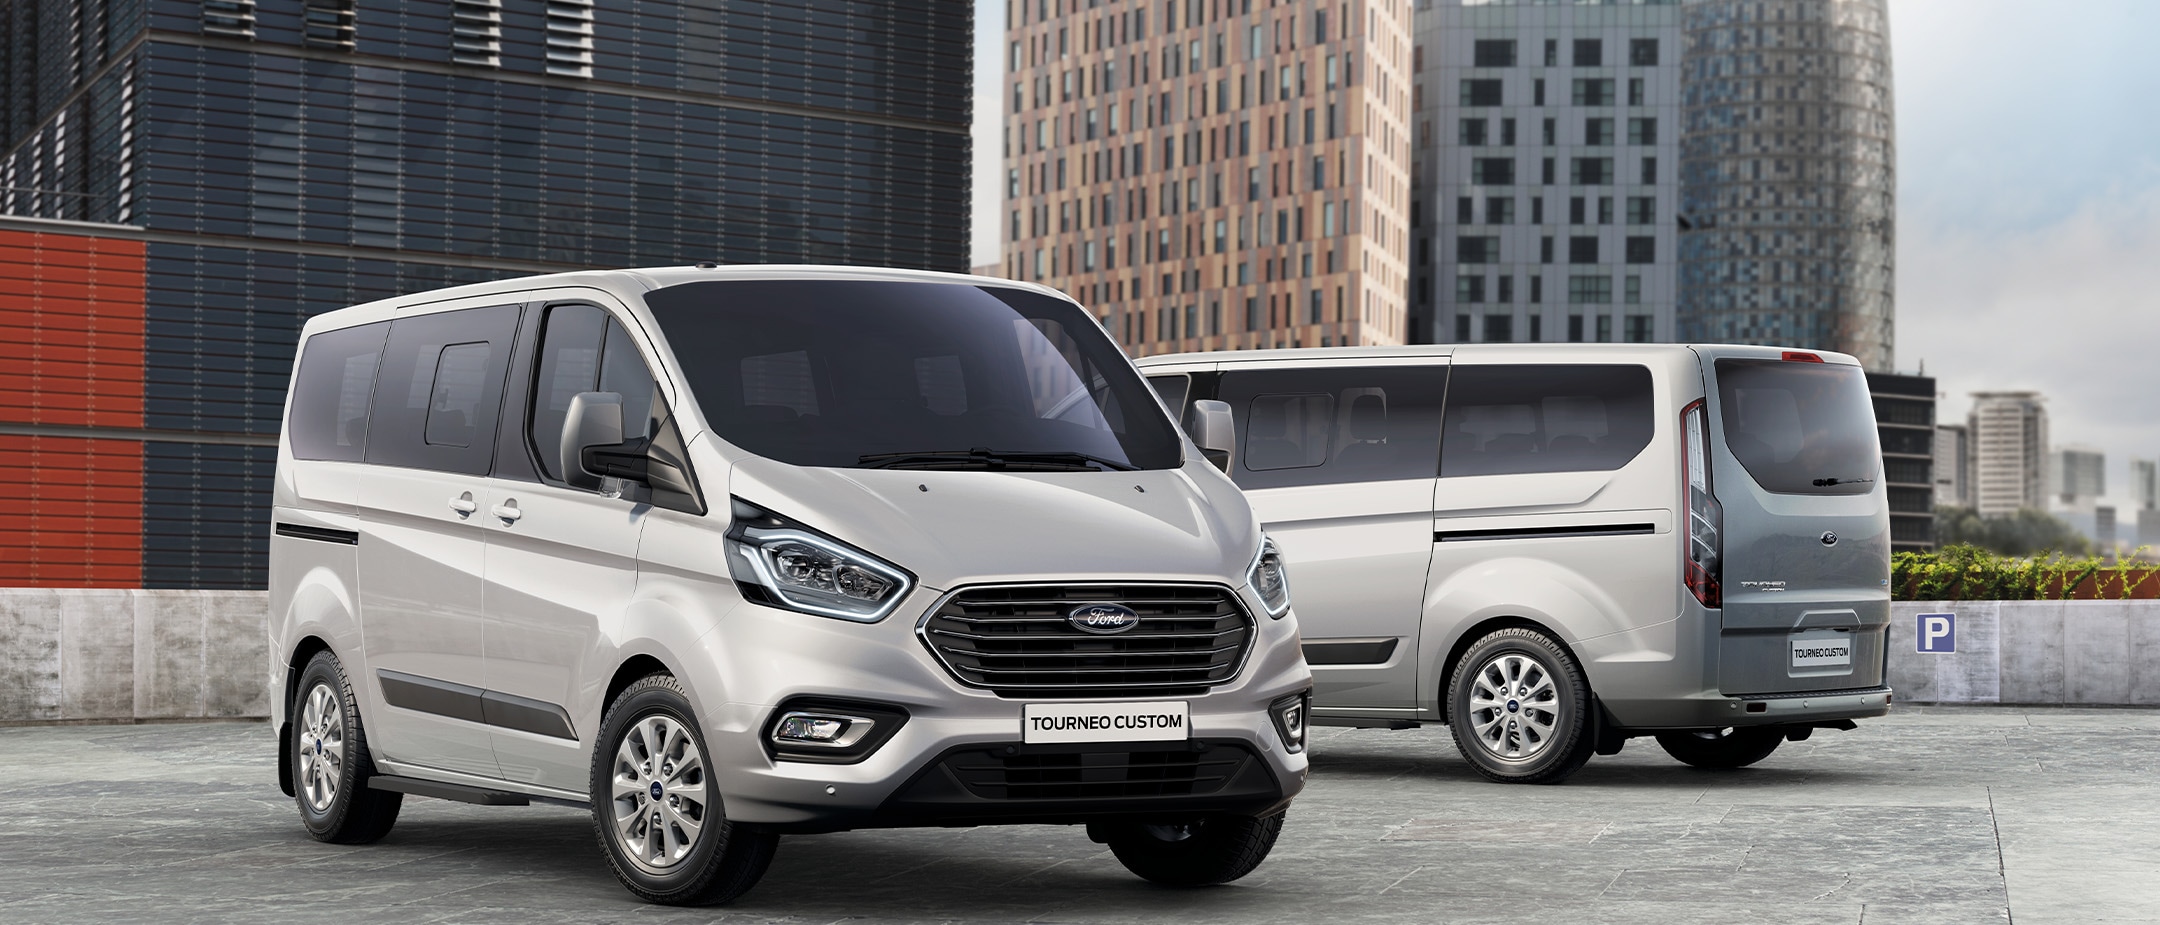 Ford Commercial Vehicle Accessories | Ford